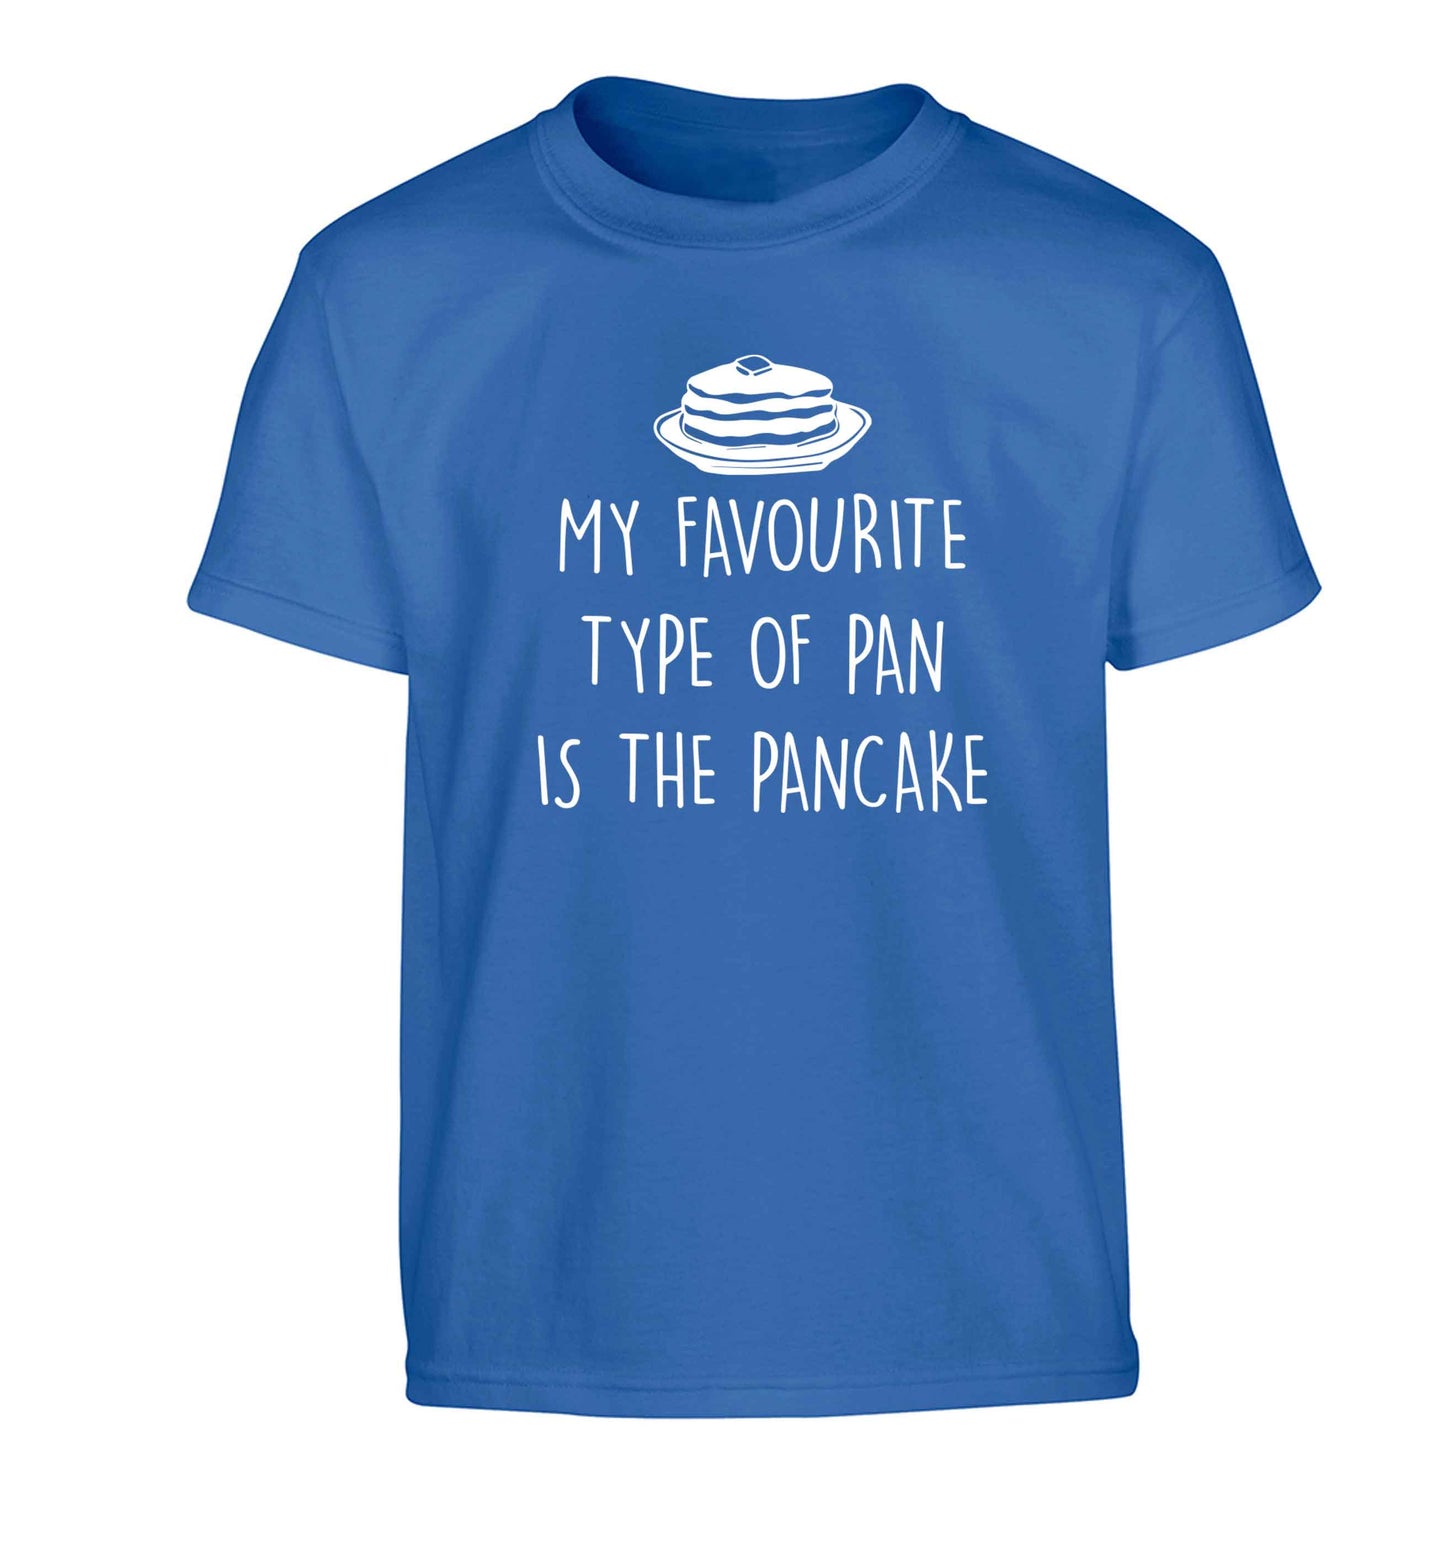 My favourite type of pan is the pancake Children's blue Tshirt 12-13 Years